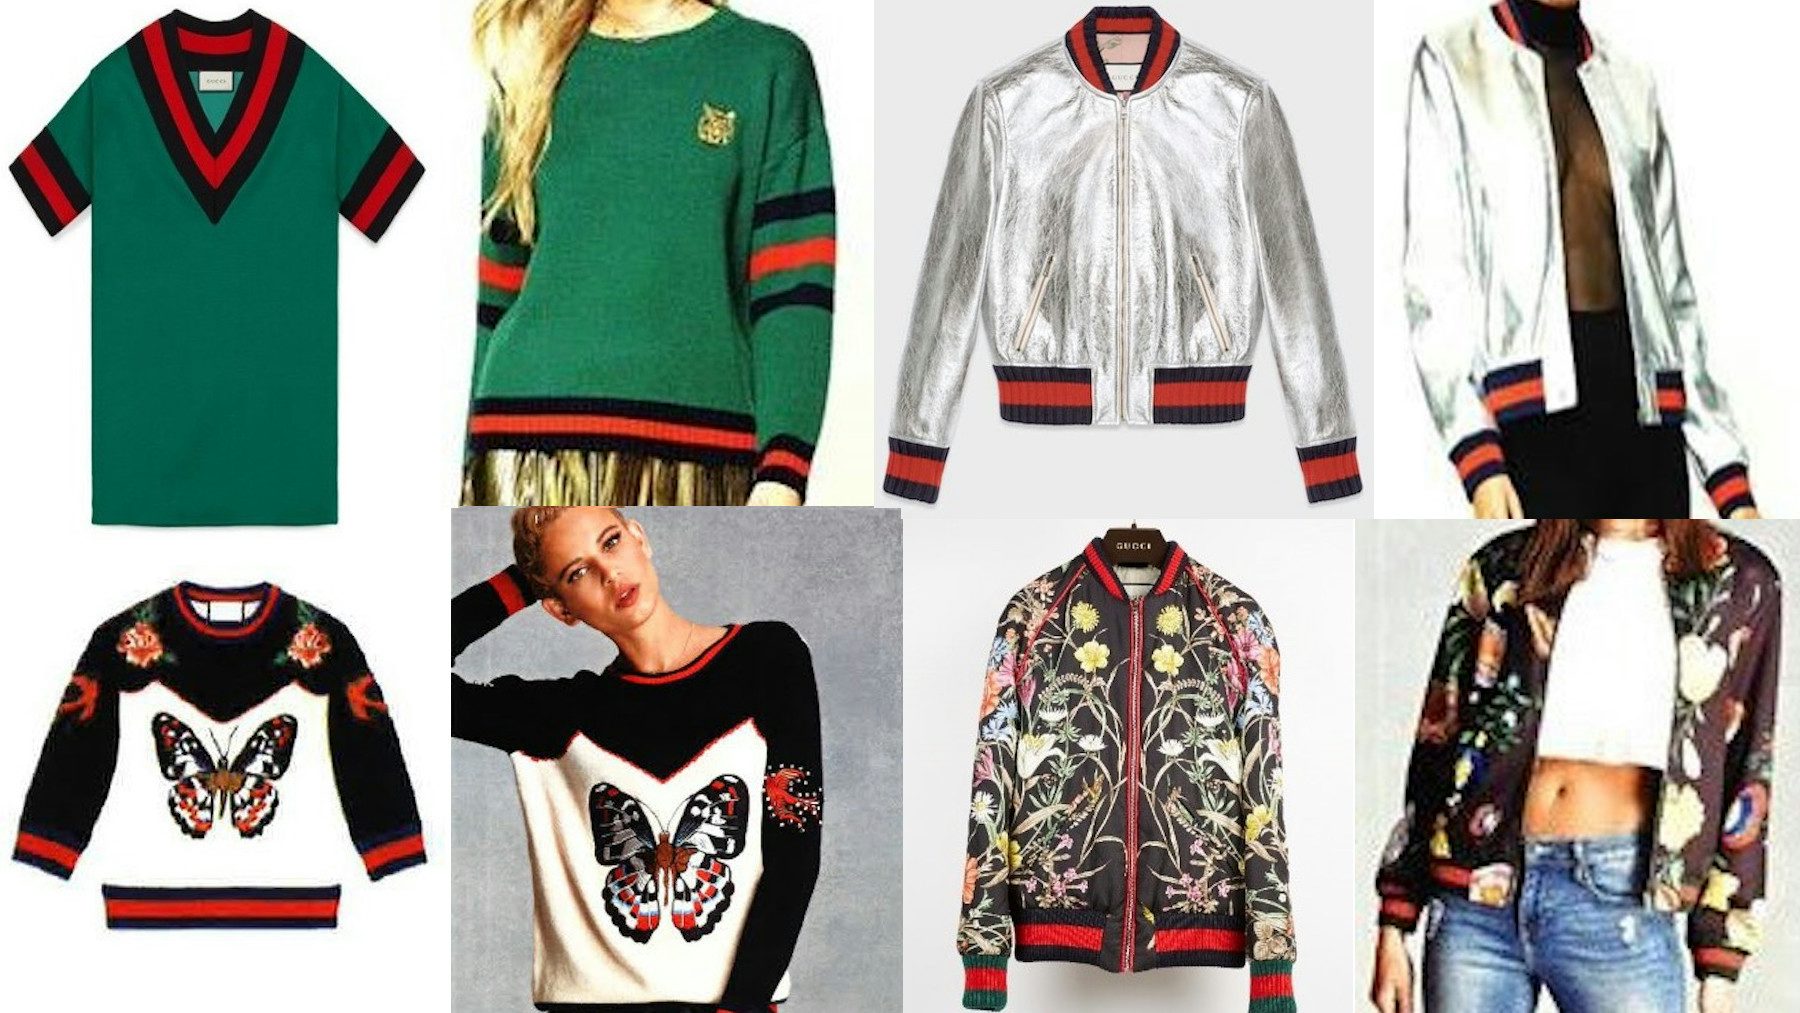 gucci expensive clothes, OFF 71%,Buy!